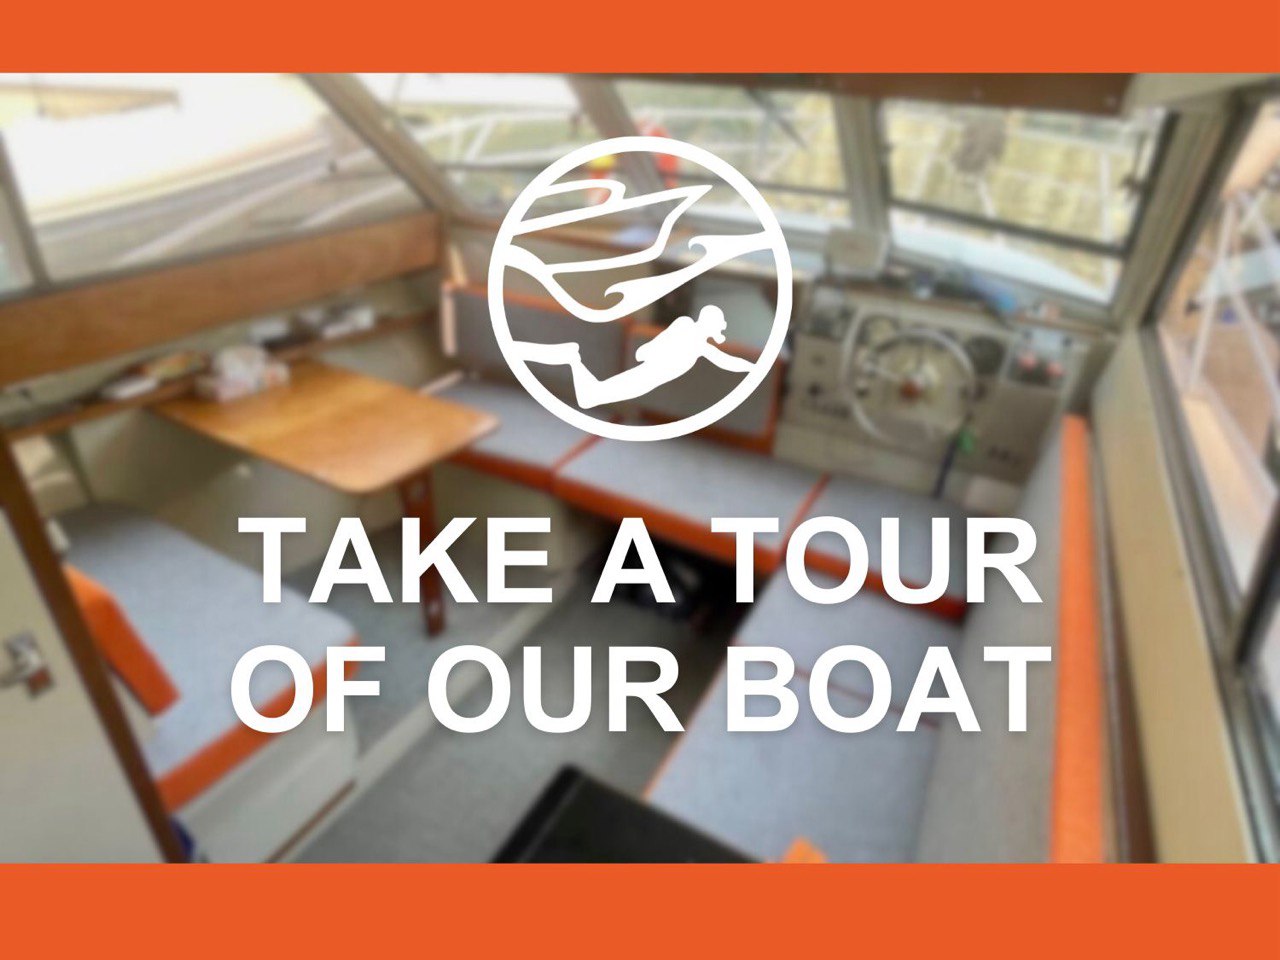 Take a tour of our boat